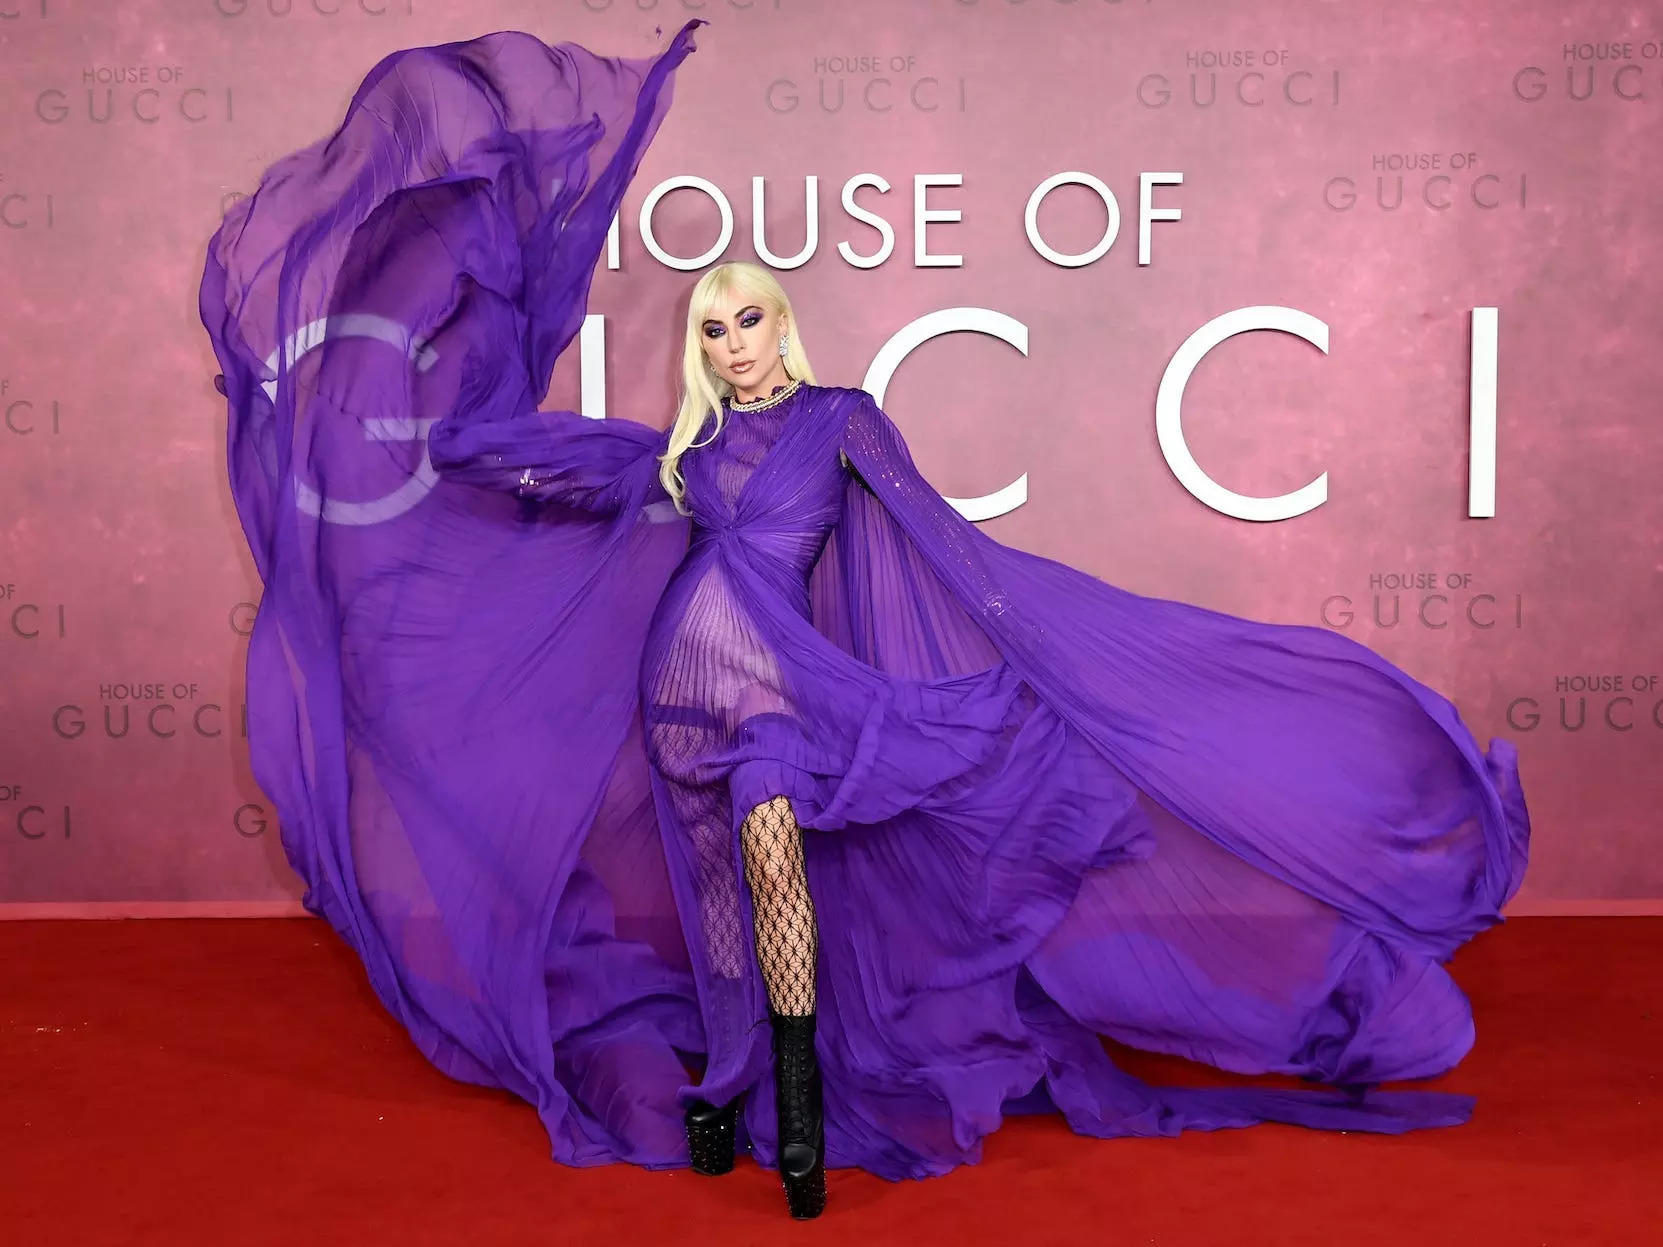 Lady Gaga wore a sheer, purple dress with a daring slit and statement ...